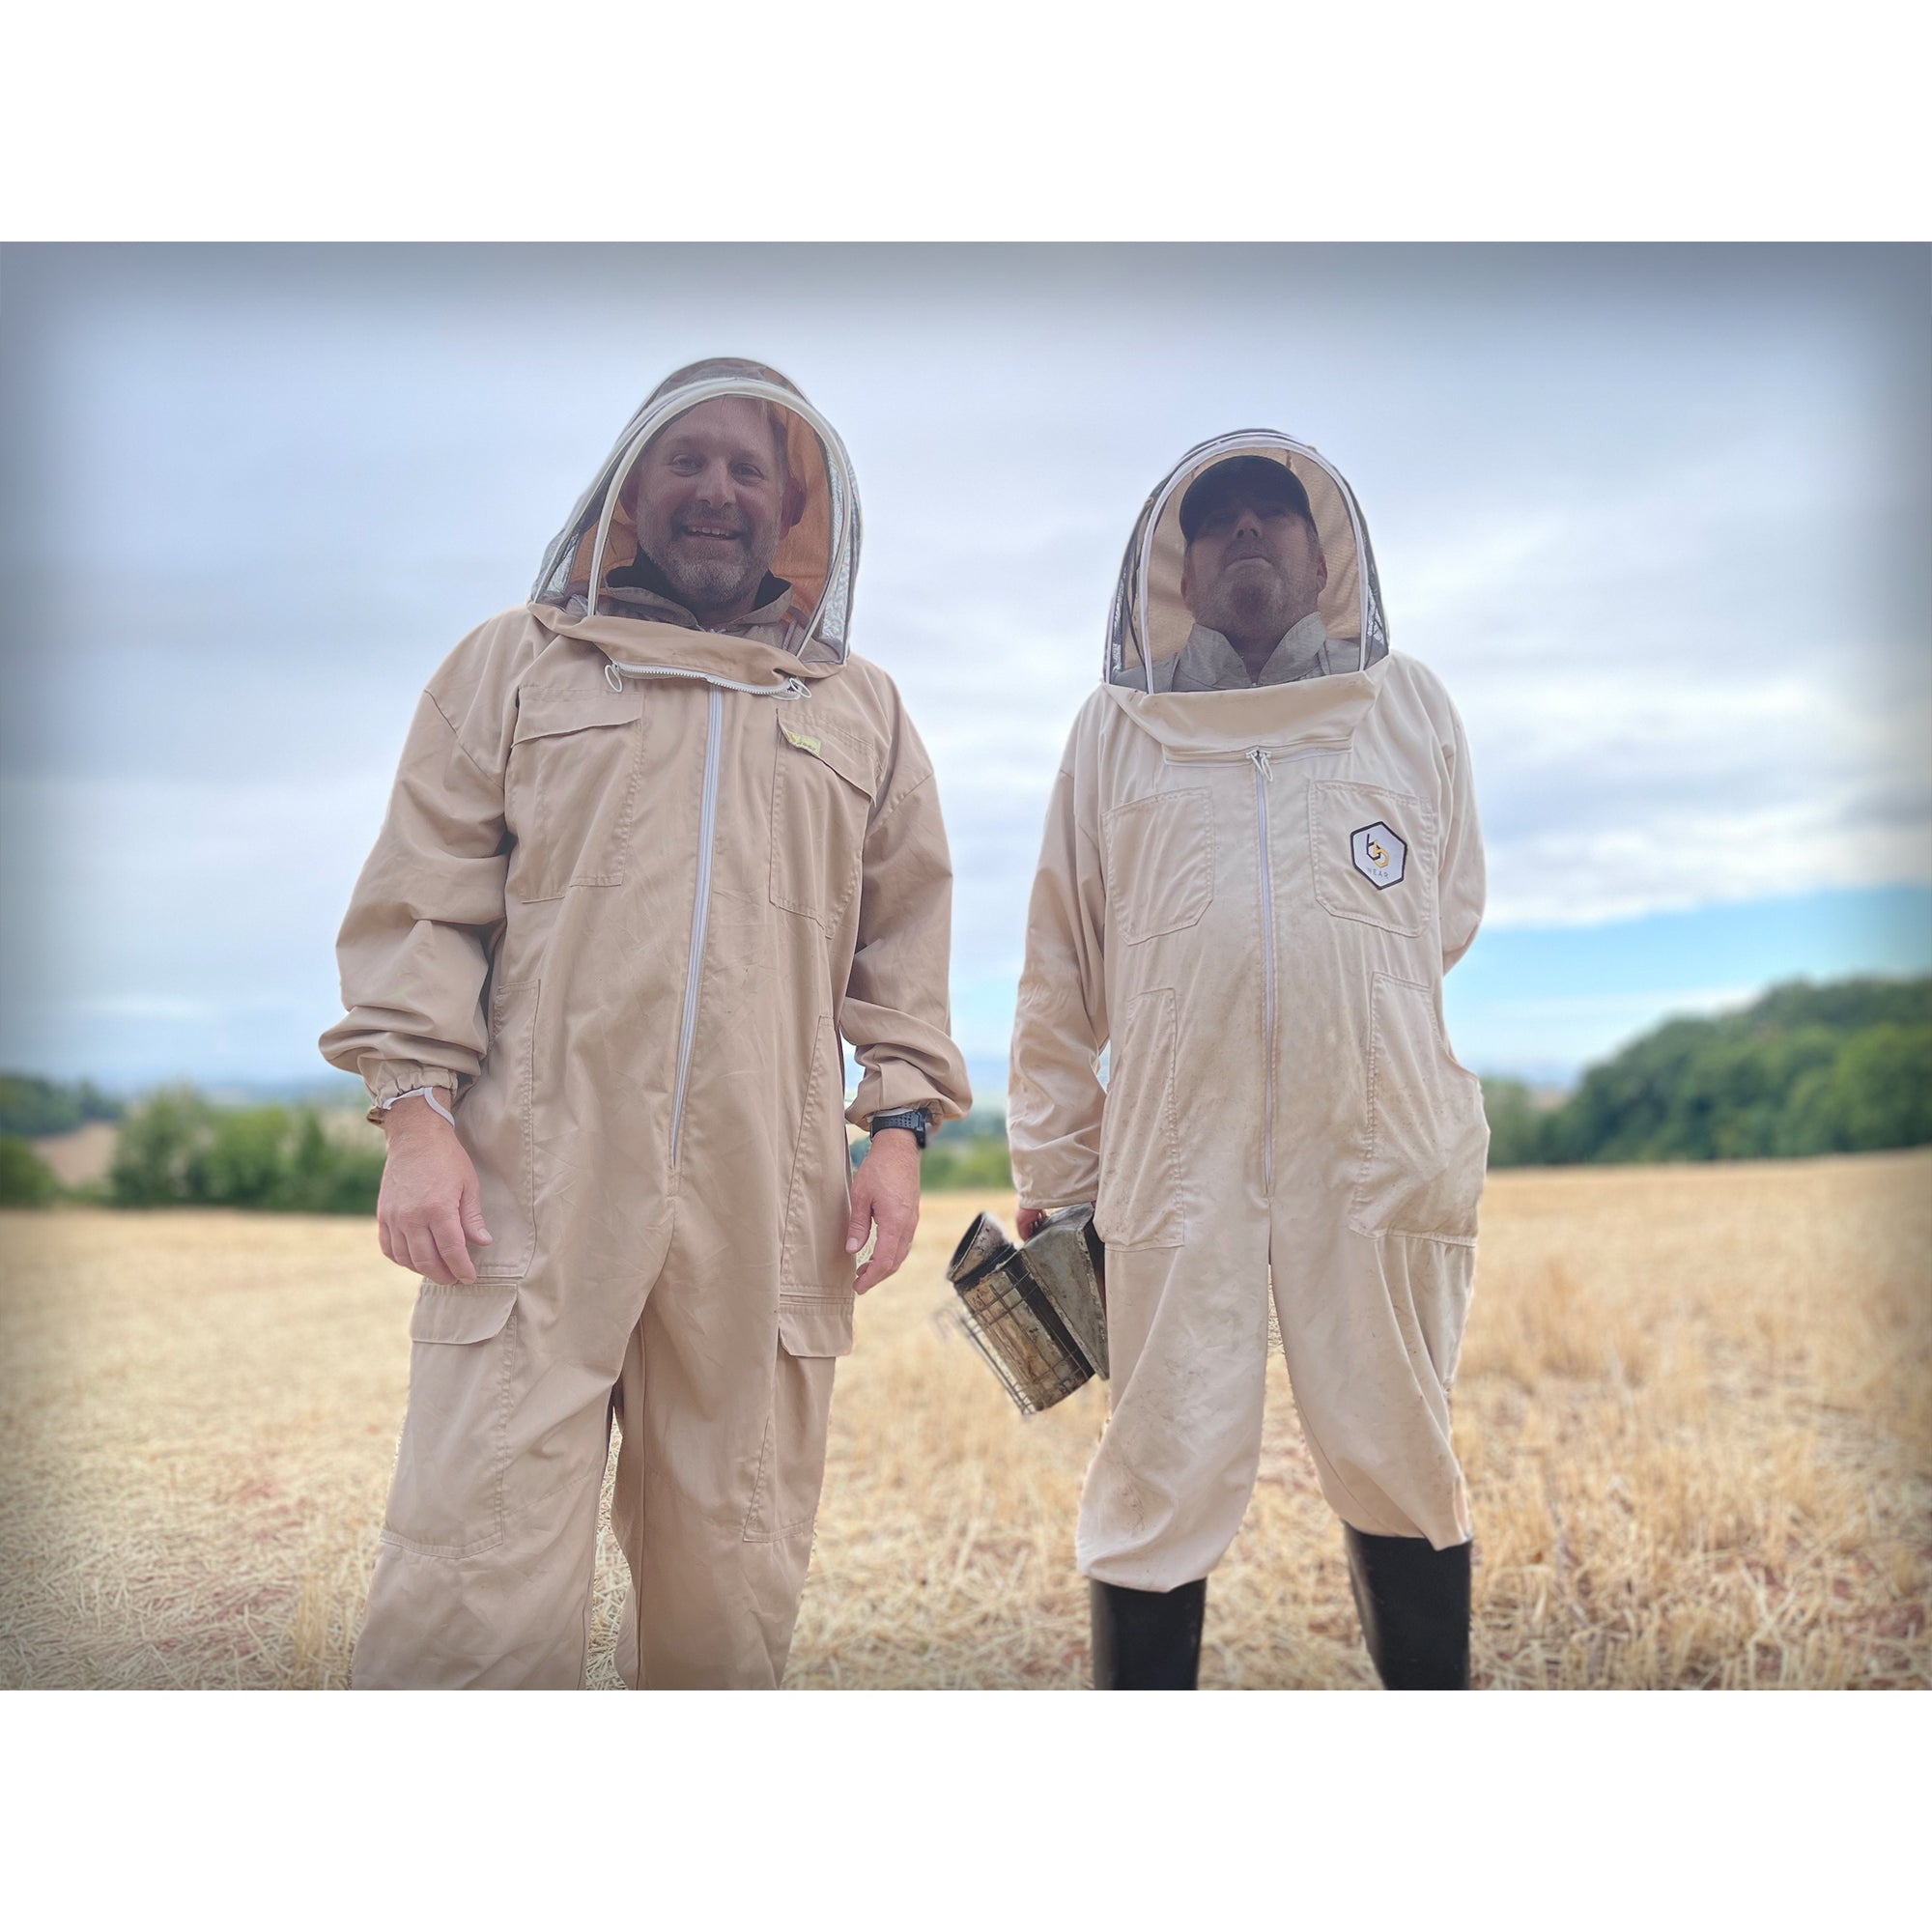 Simon and Neil The beekeeper